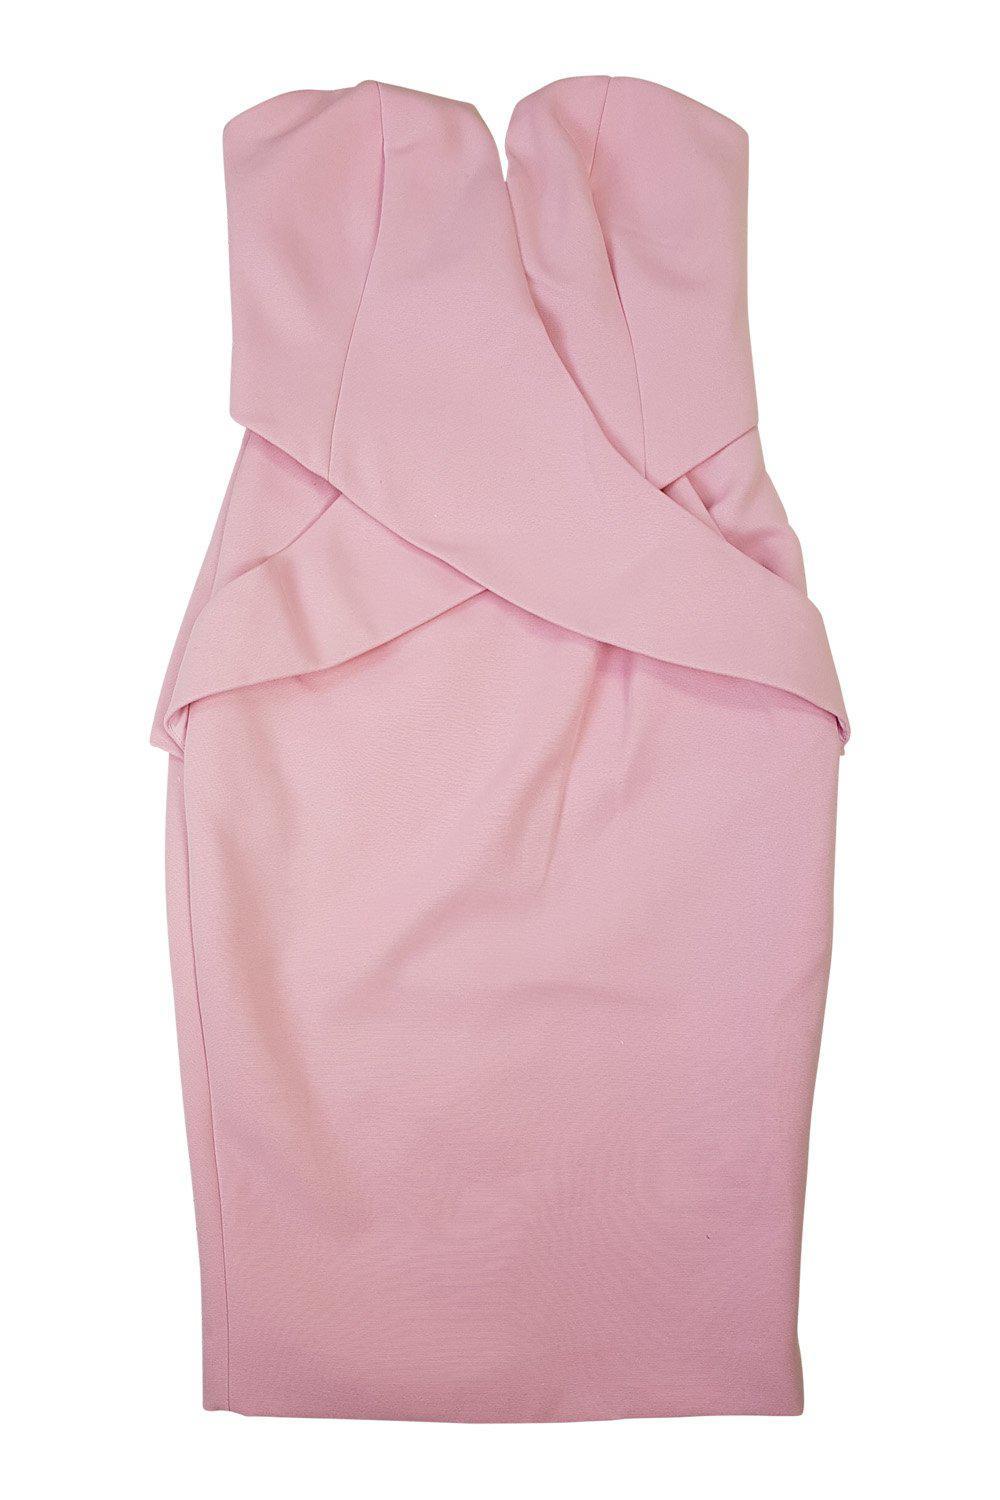 FINDERS KEEPERS Inbetween Days Candy Pink Bustier Dress (XS)-Finders Keepers-The Freperie